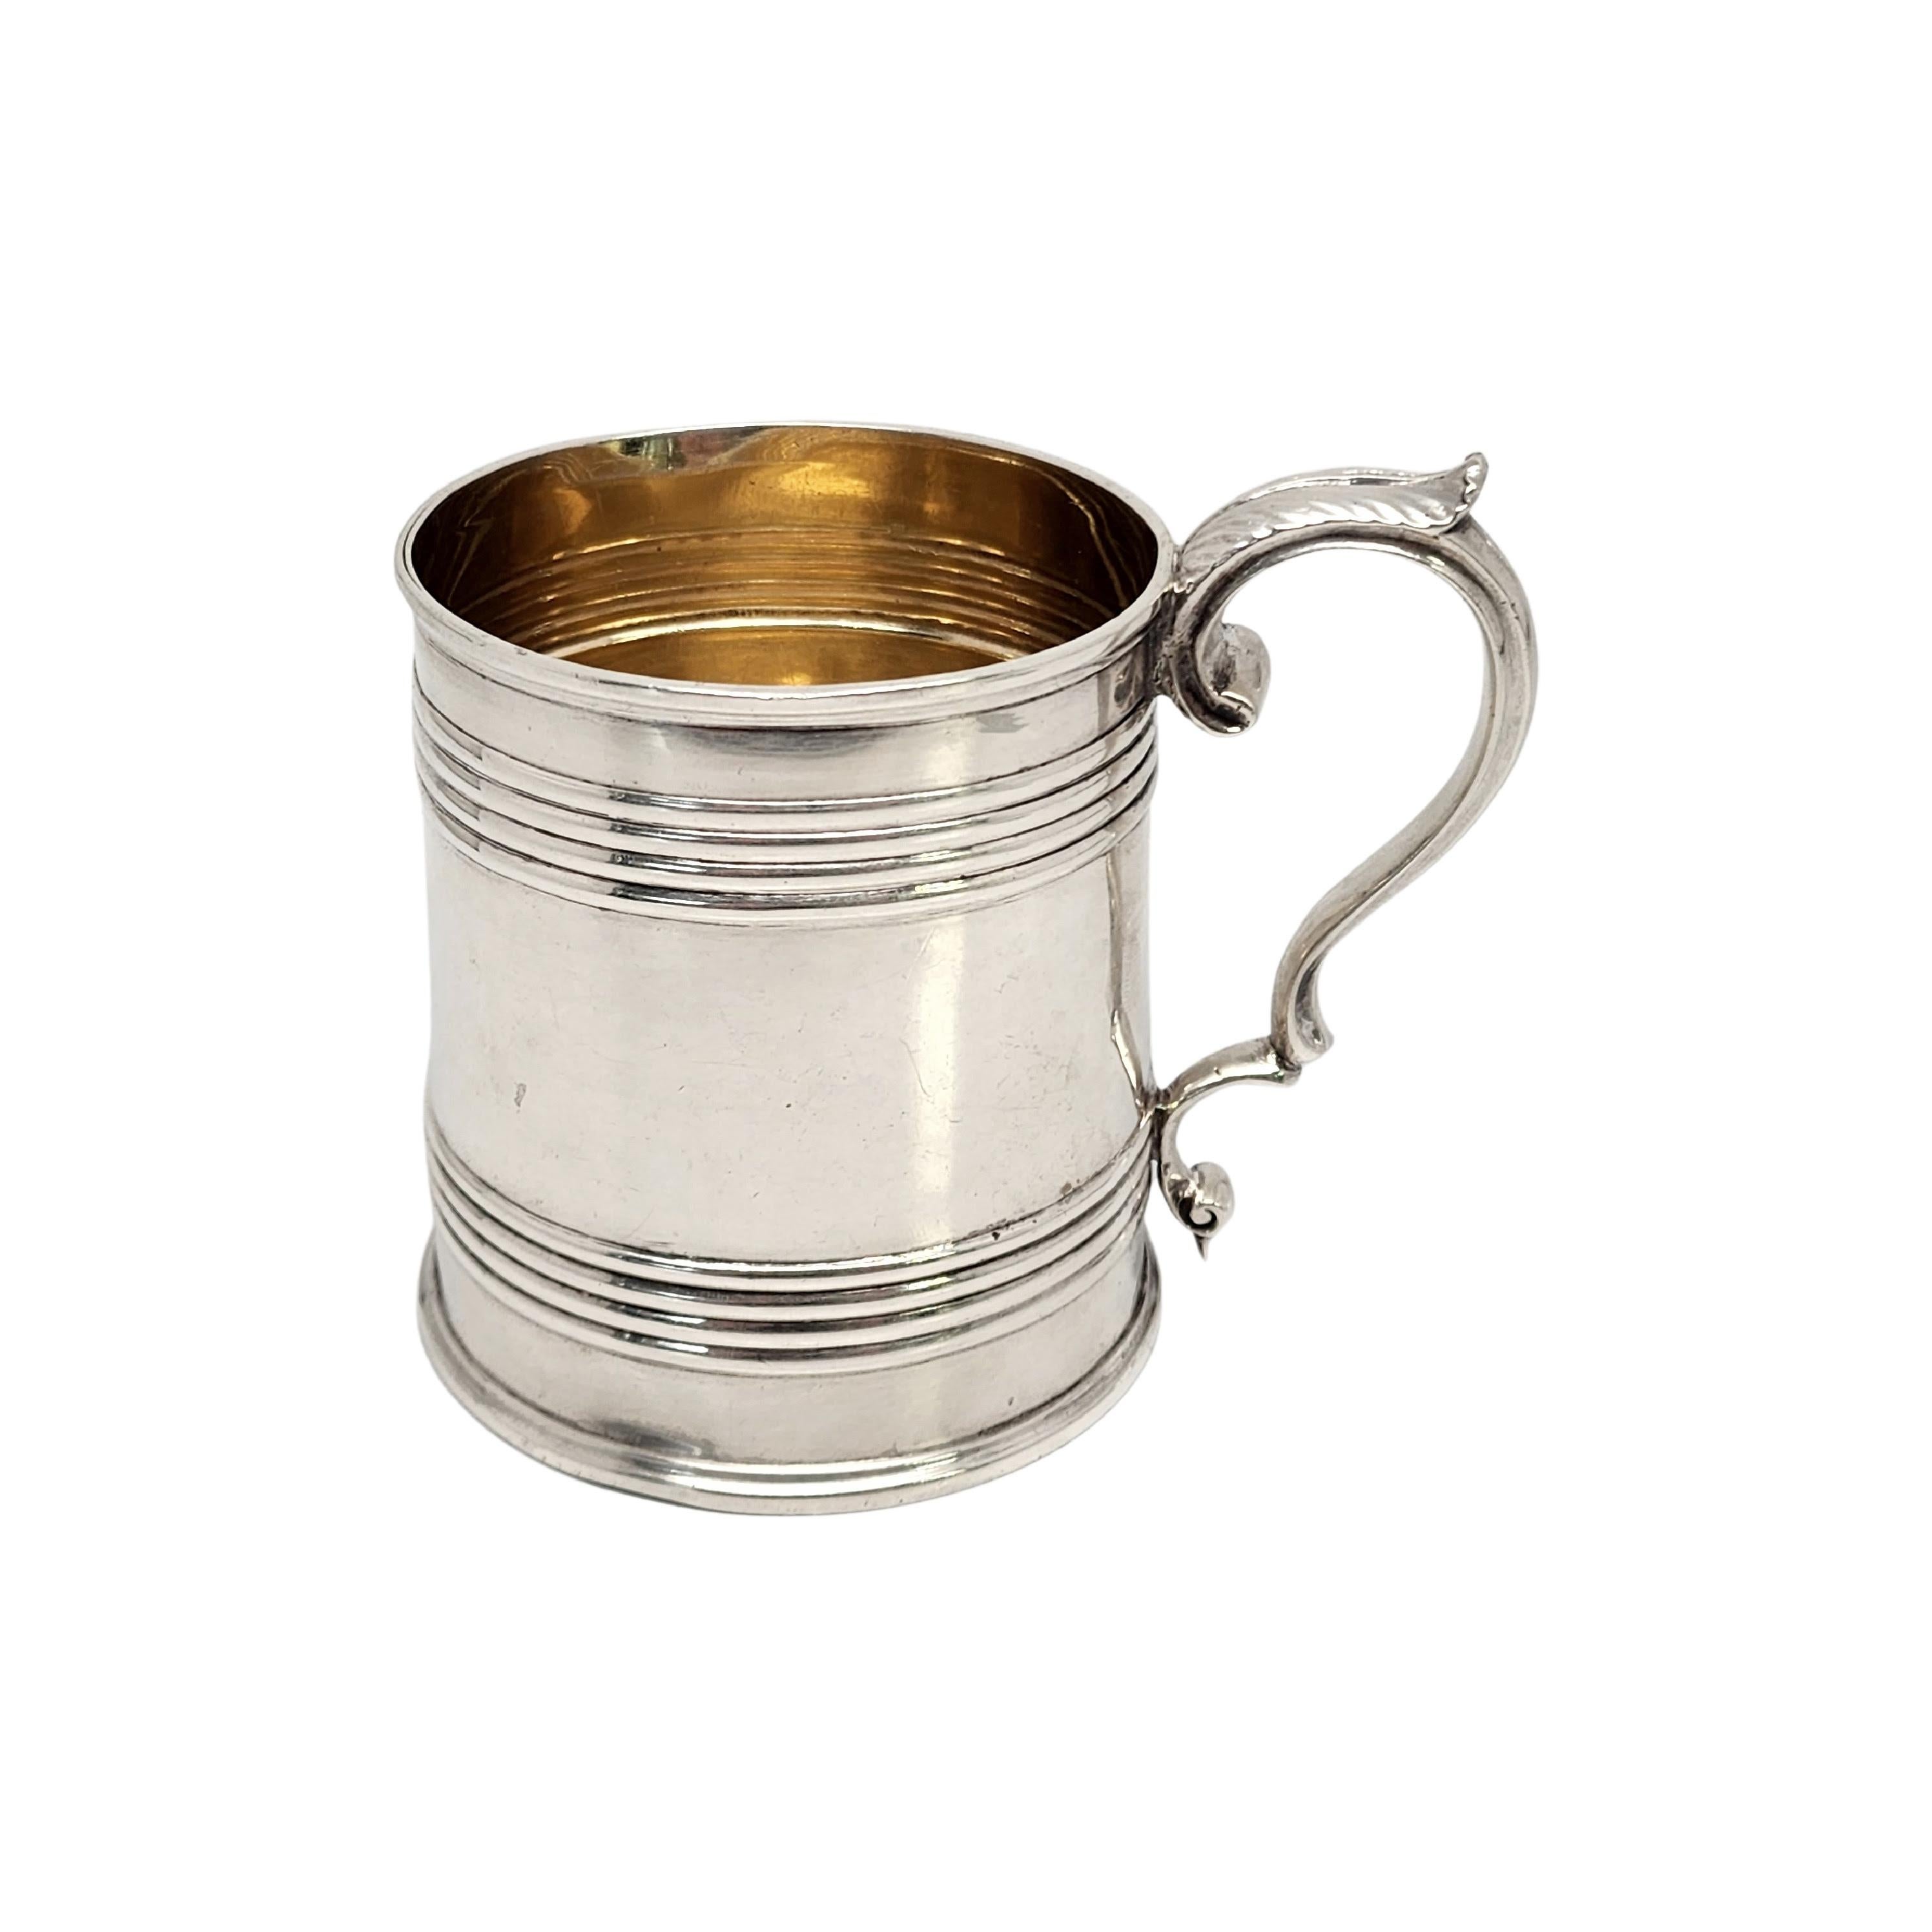 Antique sterling silver with gold wash interior cup by Elder & Co of Edinburgh, Scotland, circa 1832.

Barrel like design cup/mug featuring a delicately curved handle with leaf design at top. Gold washed interior. Etched detail of a hand holding a